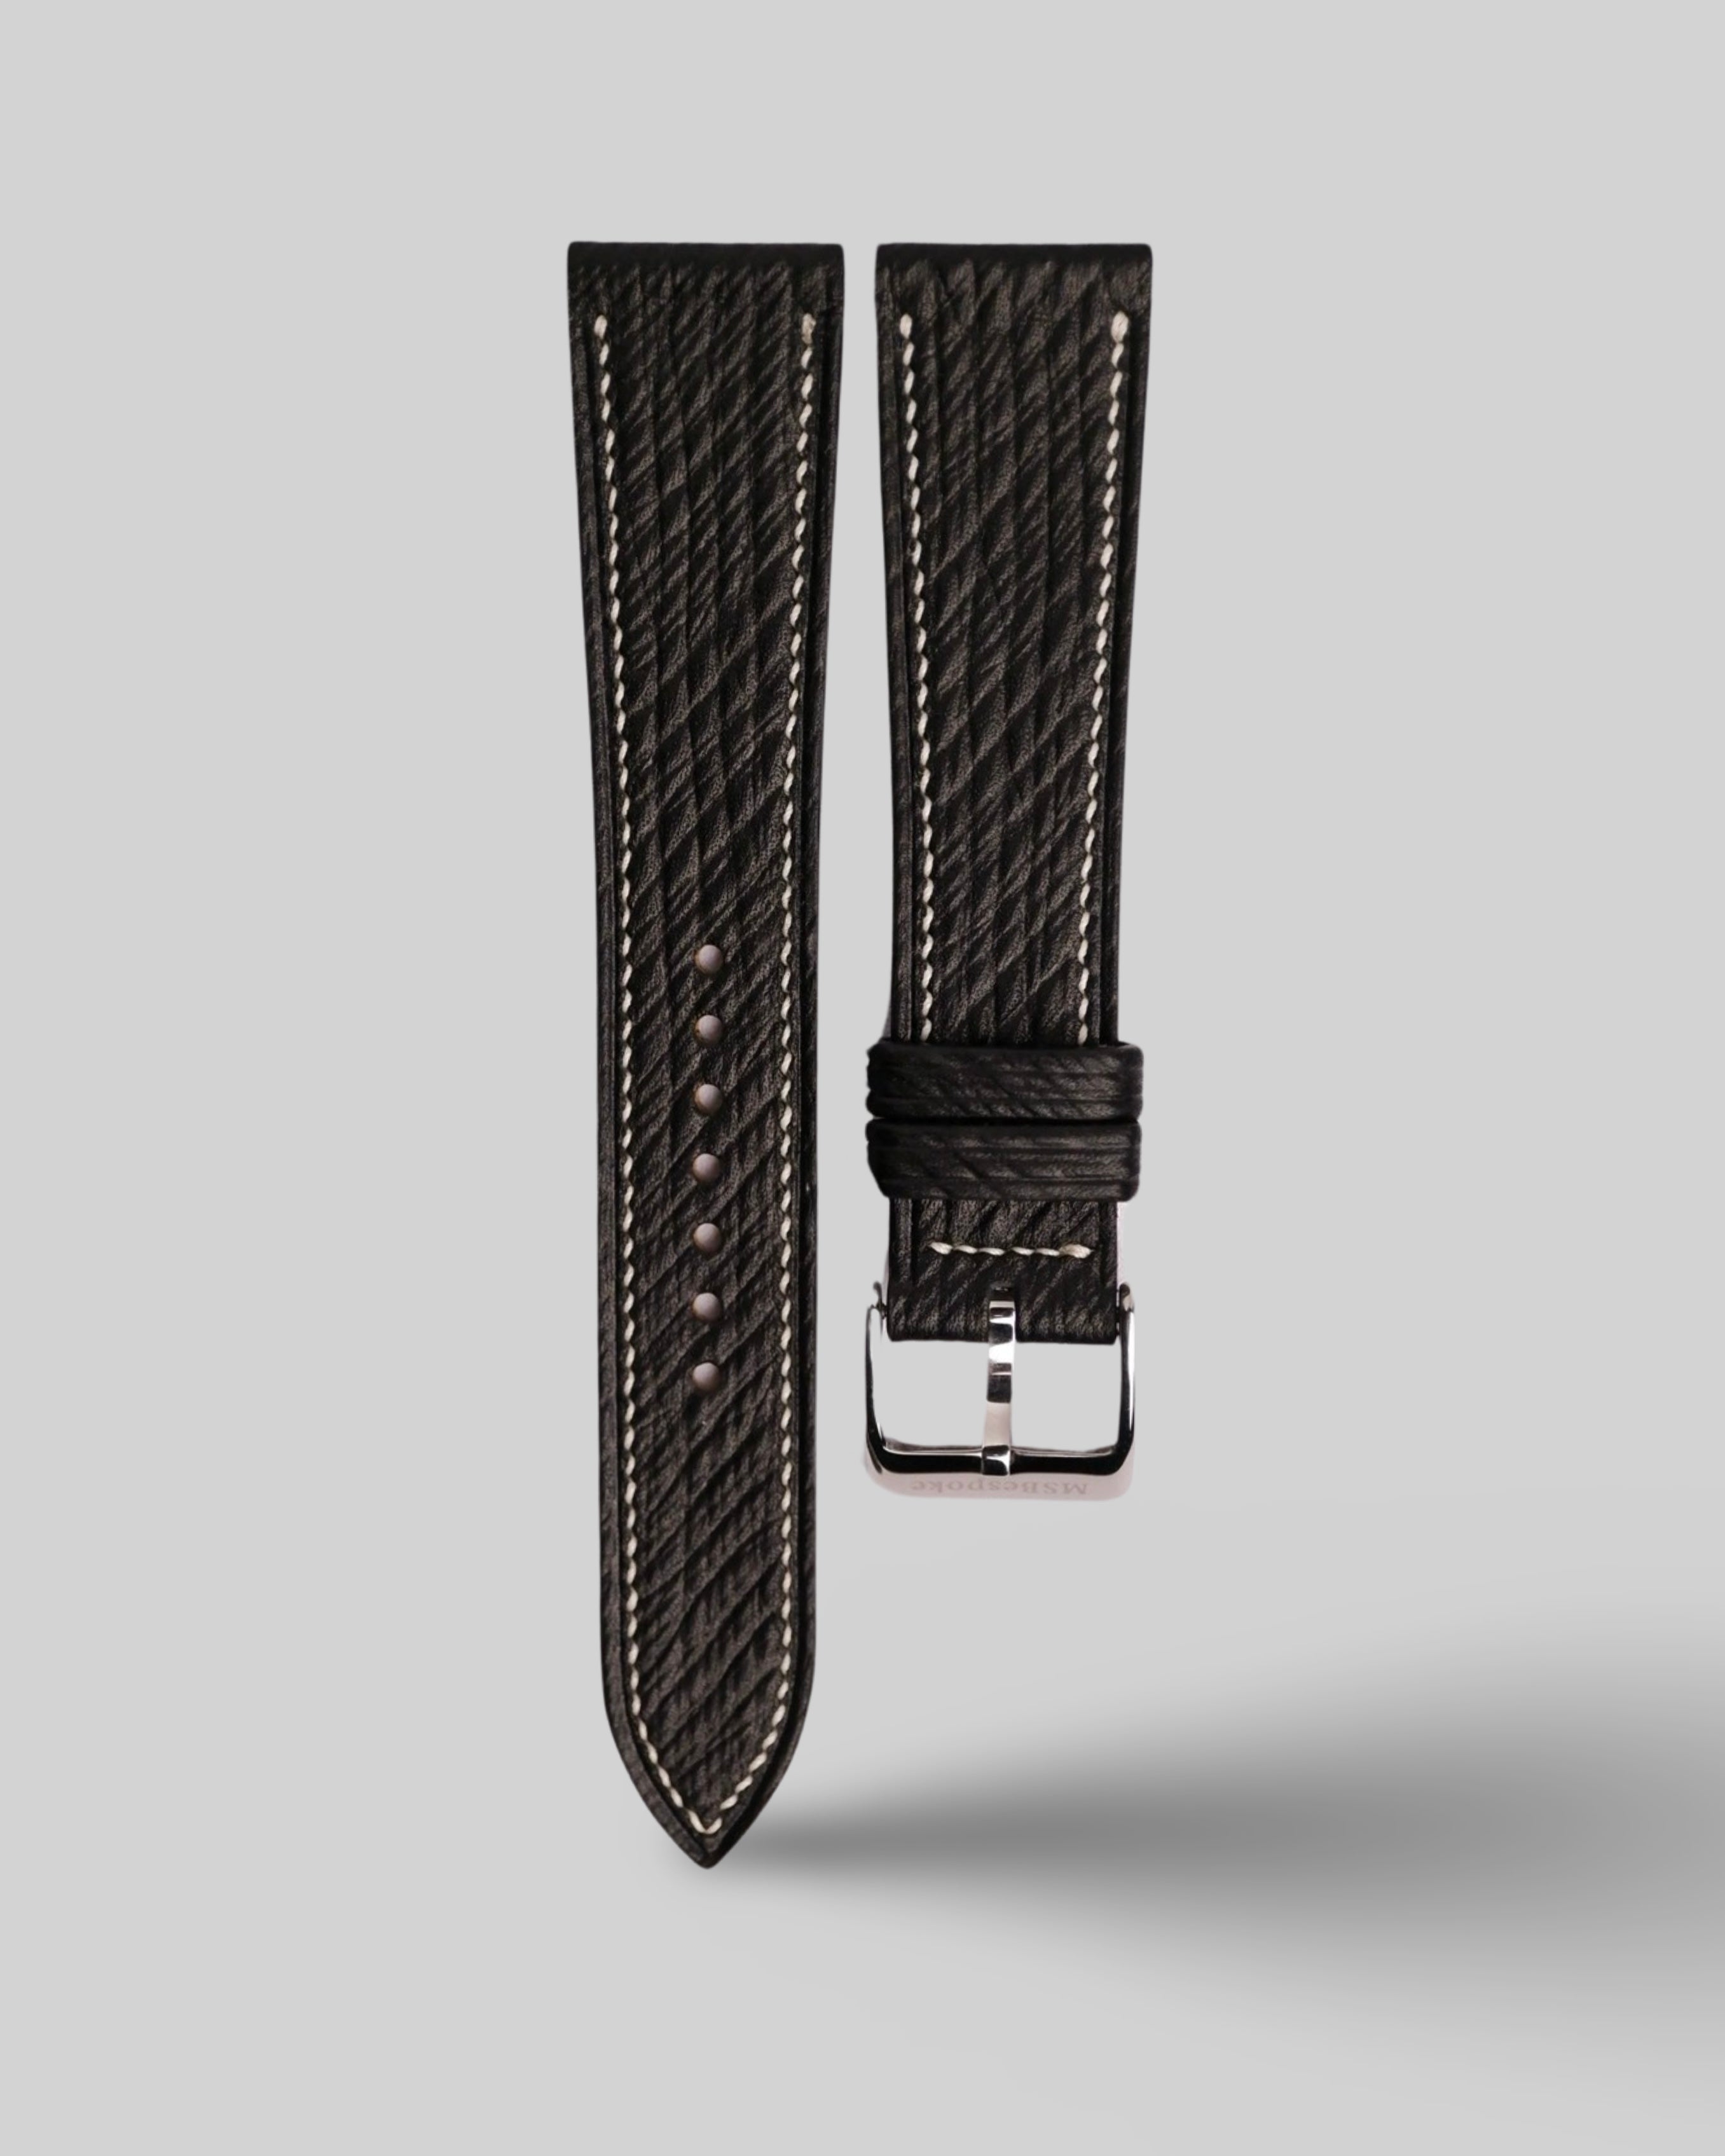 Russian Calf Black Leather Watch Strap